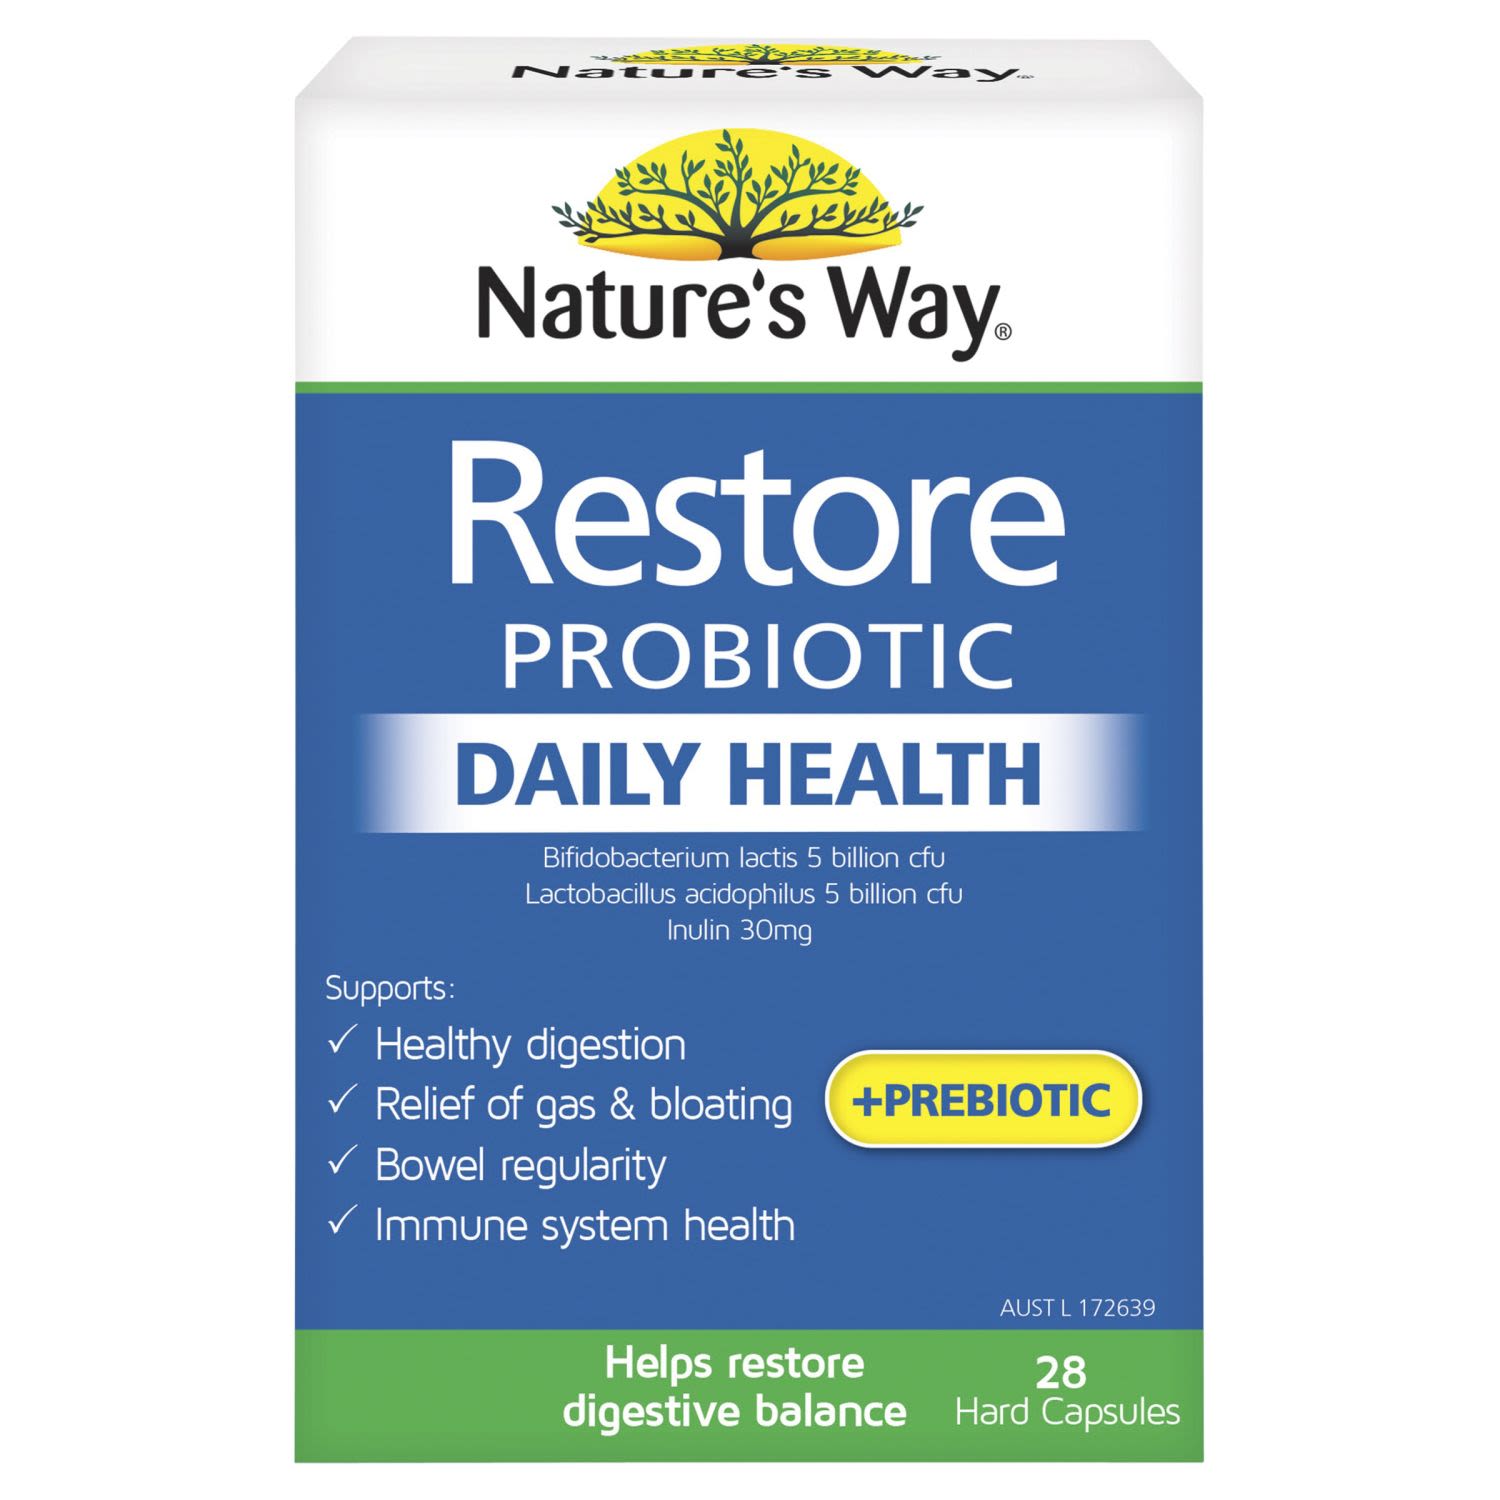 Nature's Way Restore Probiotic Daily Health, 28 Each